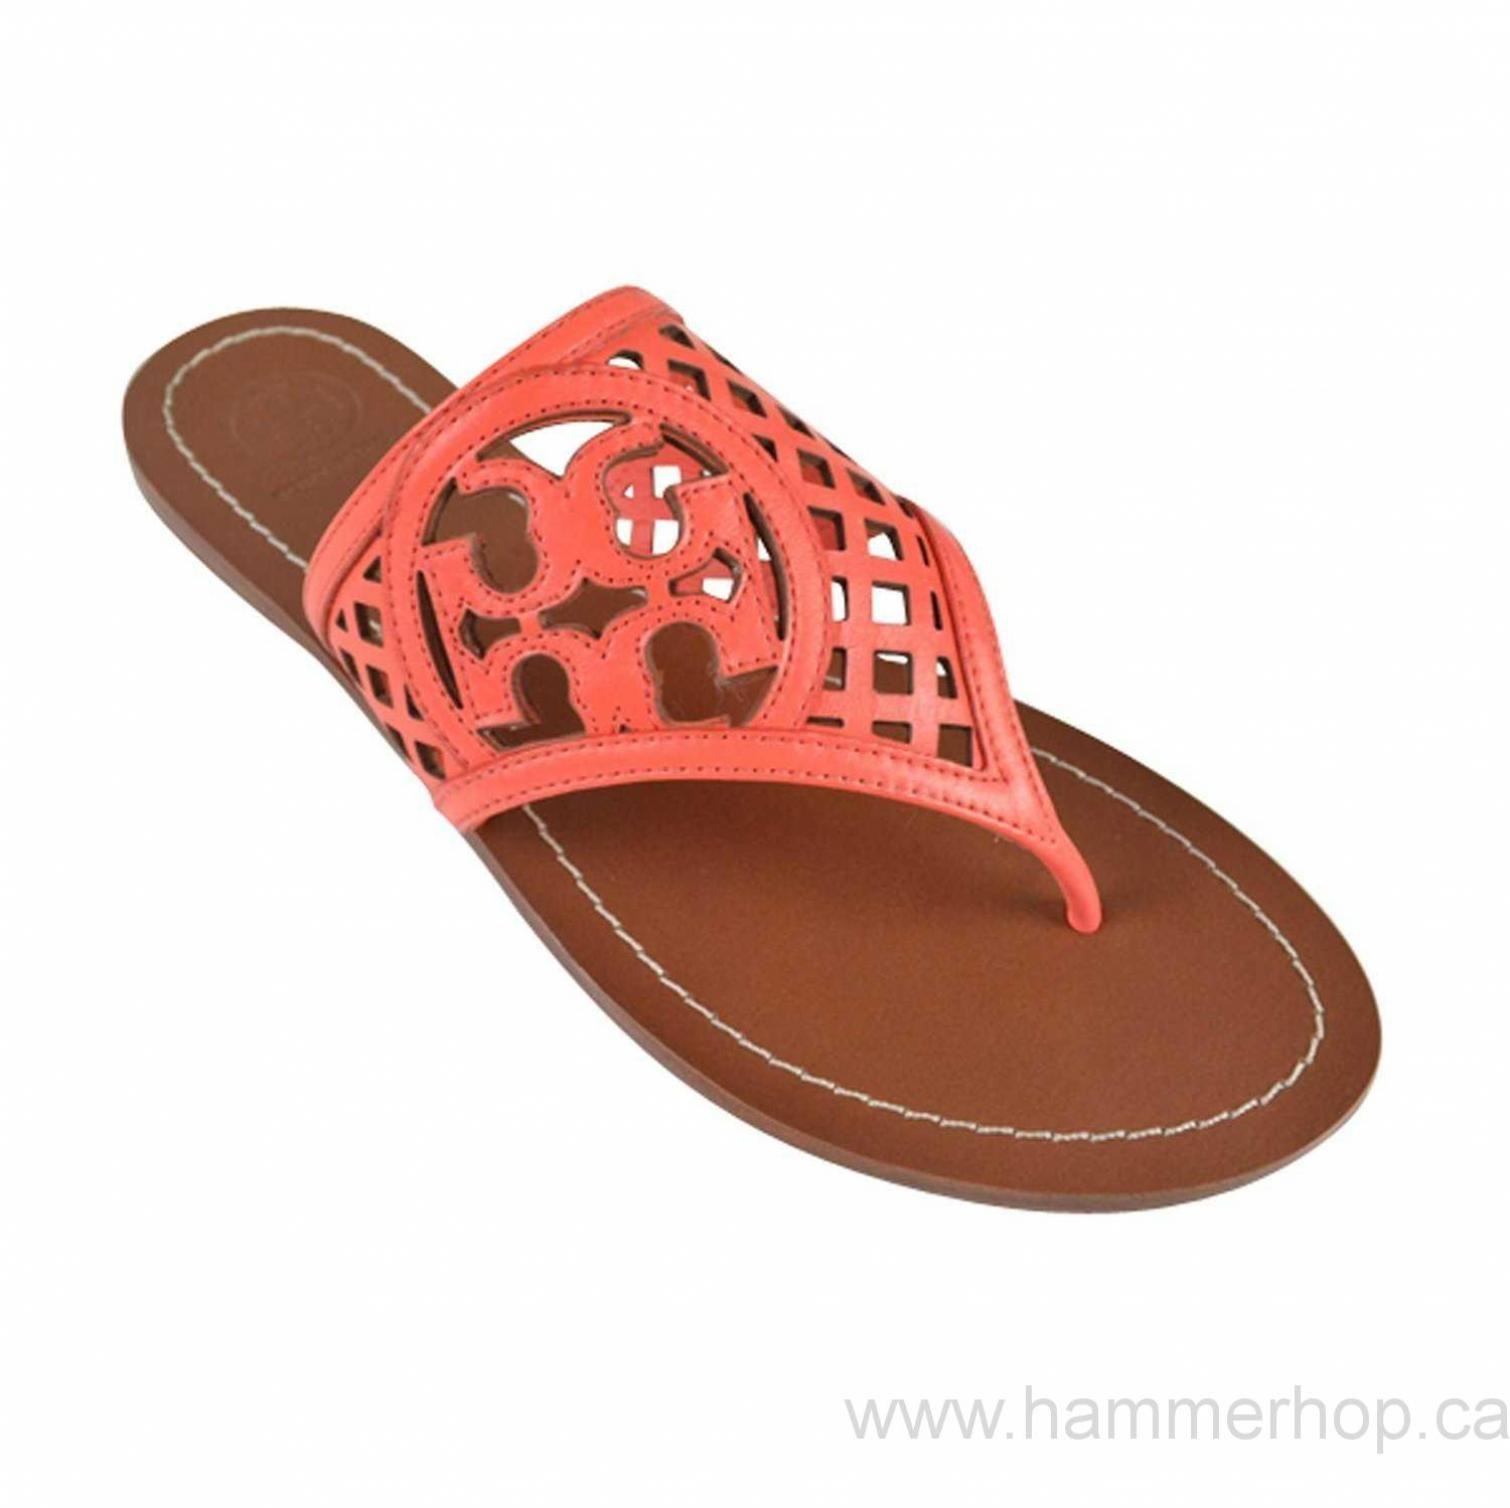 Poppy Shoes Logo - Canada Women's - Tory Burch THATCHED PERFORATED Flip Flop Leather ...